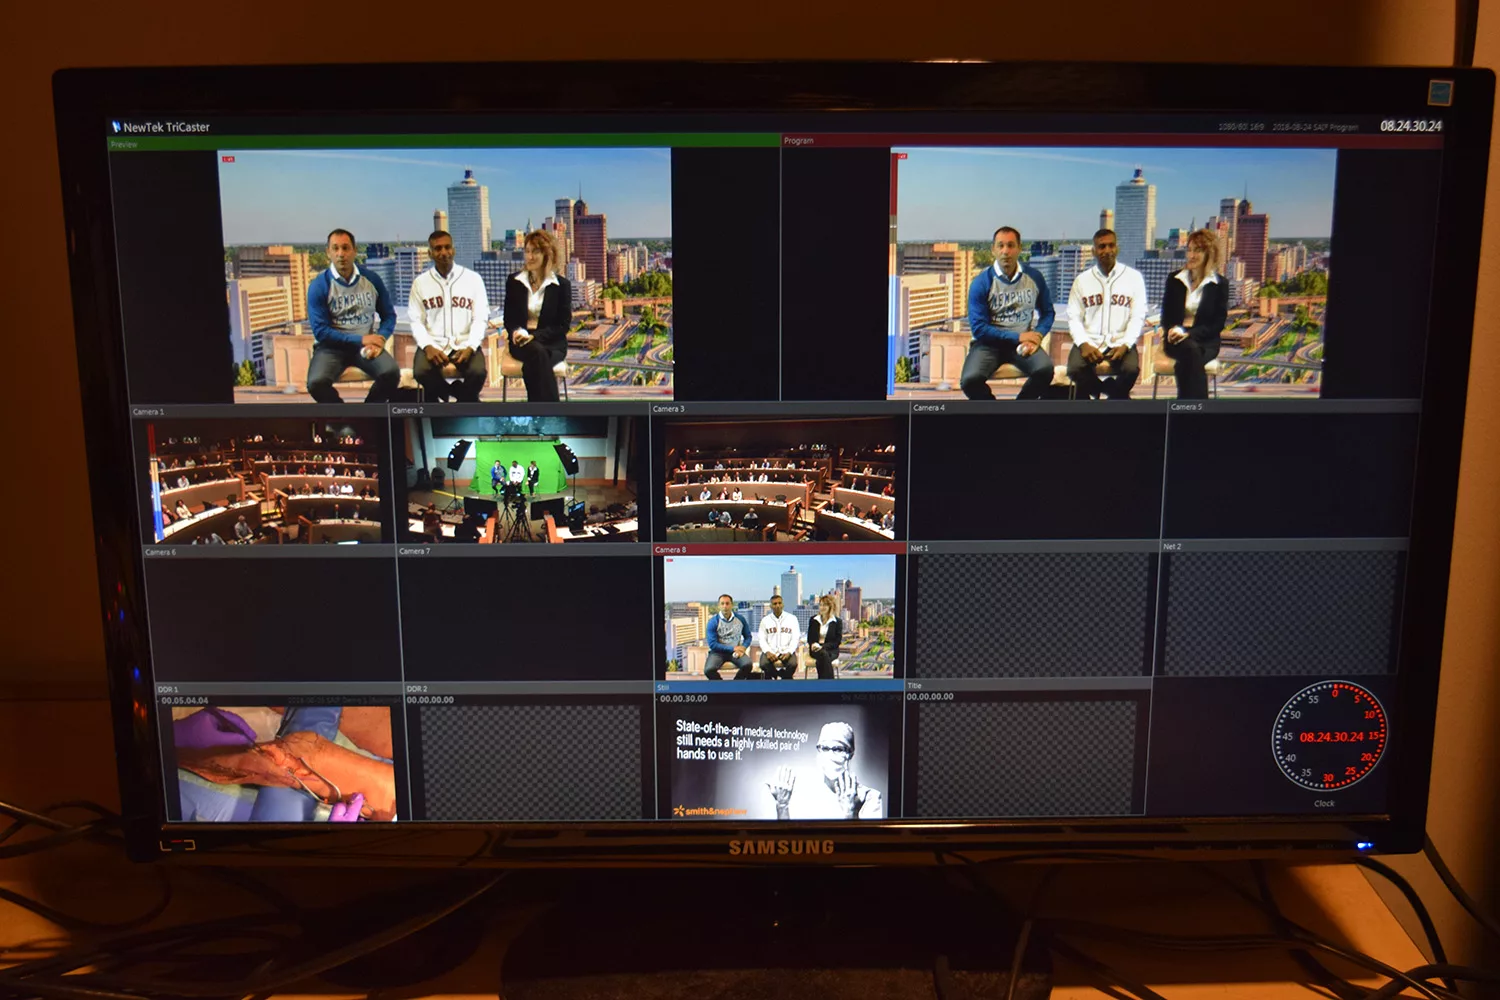 Image of a computer screen displaying the NewTek TriCaster software in action, demonstrating its capabilities for real-time video production. Various windows within the software are open, showing different aspects of the production process. This image provides a glimpse into the advanced technology used in MCC's Corporate Video Production Services, emphasizing their cutting-edge resources.